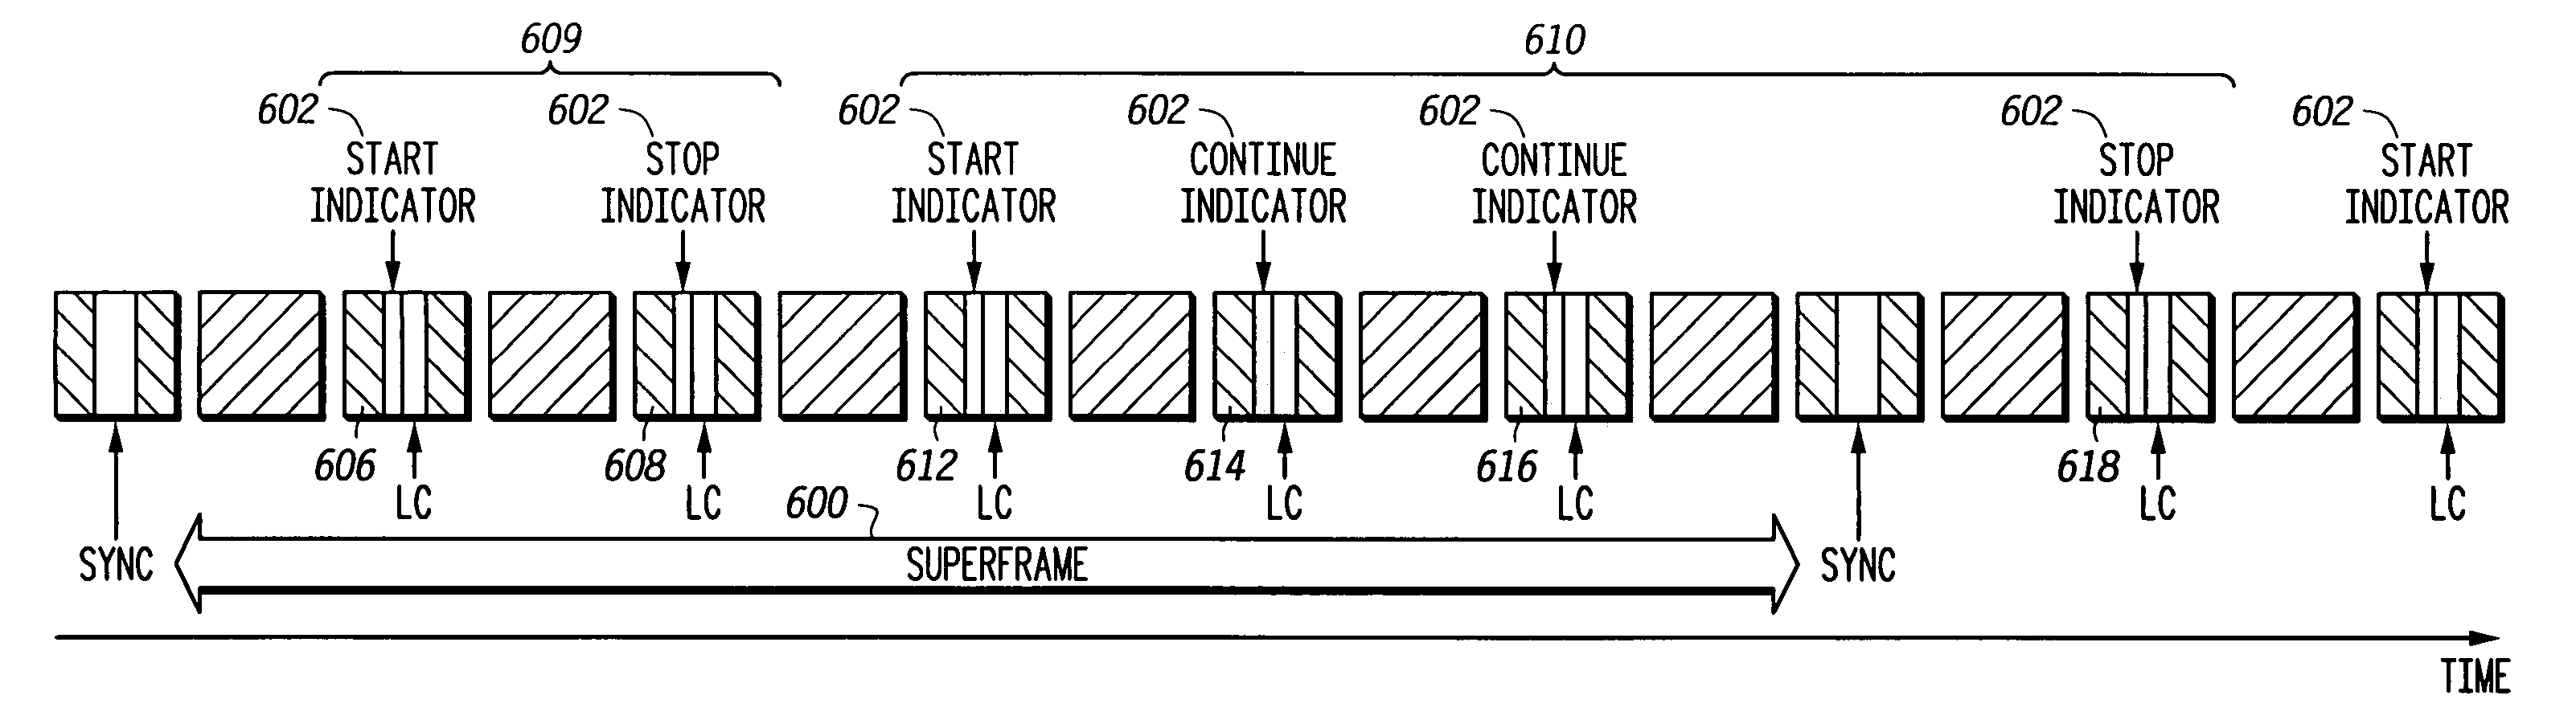 Method for selectively allocating a limited number of bits to support multiple signaling types on a low bit rate channel